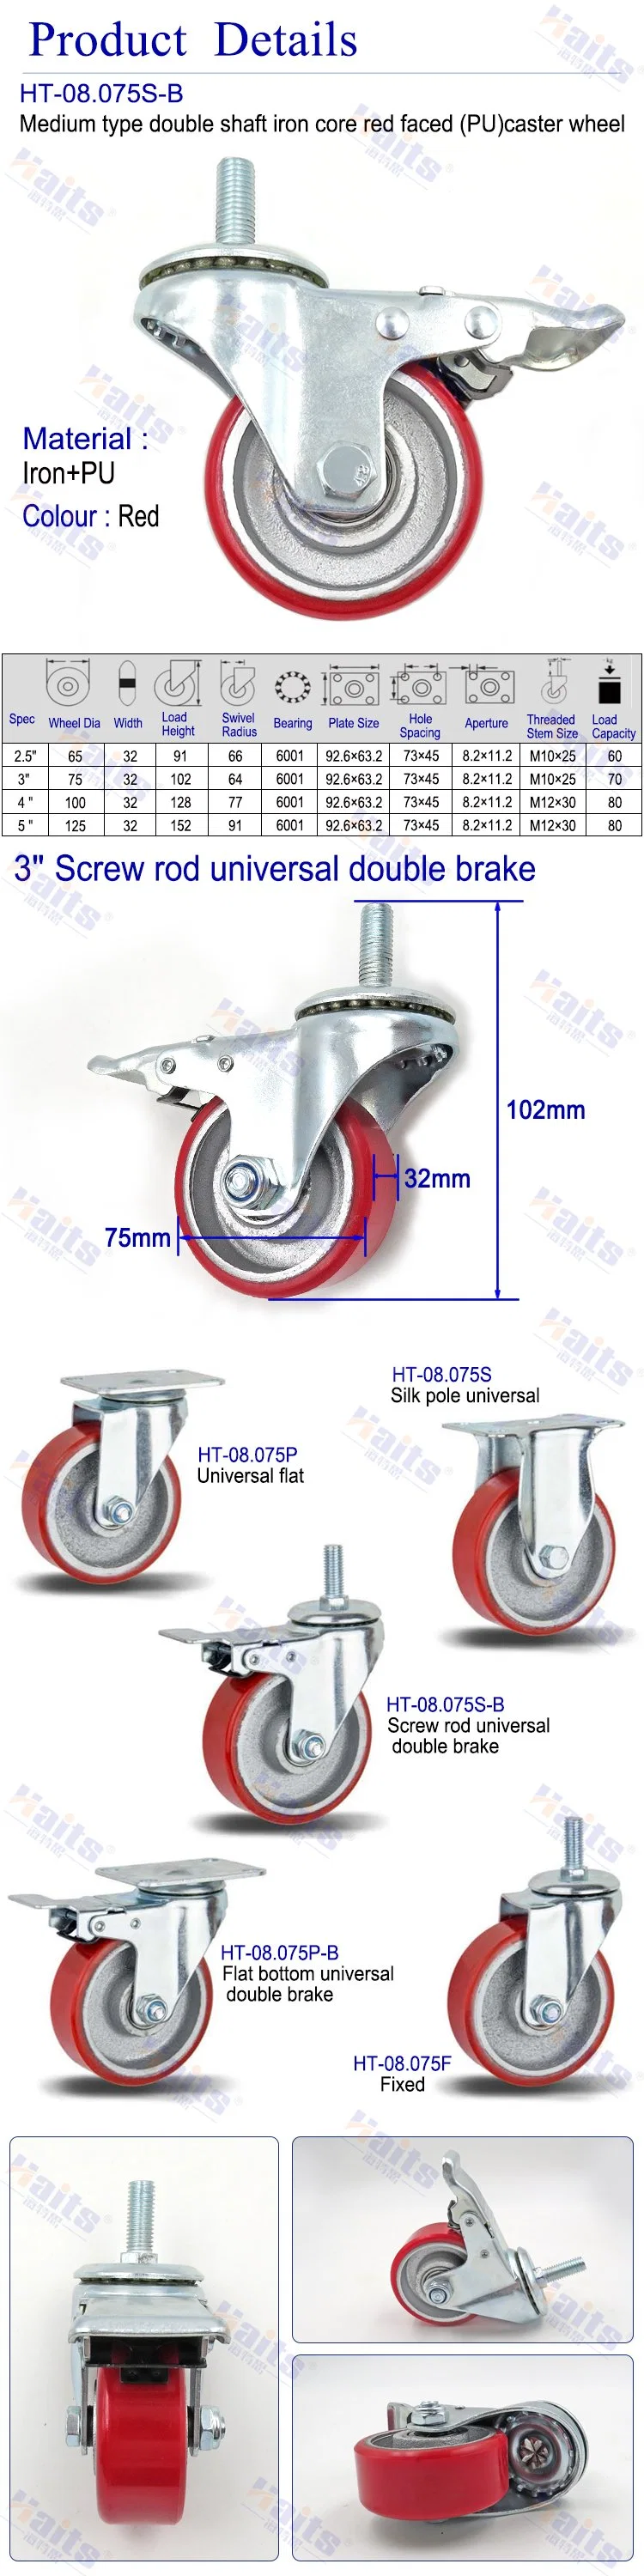 China Manufacturer 3.5 Inch Swivel Industrial PU Wheel Caster with Brake